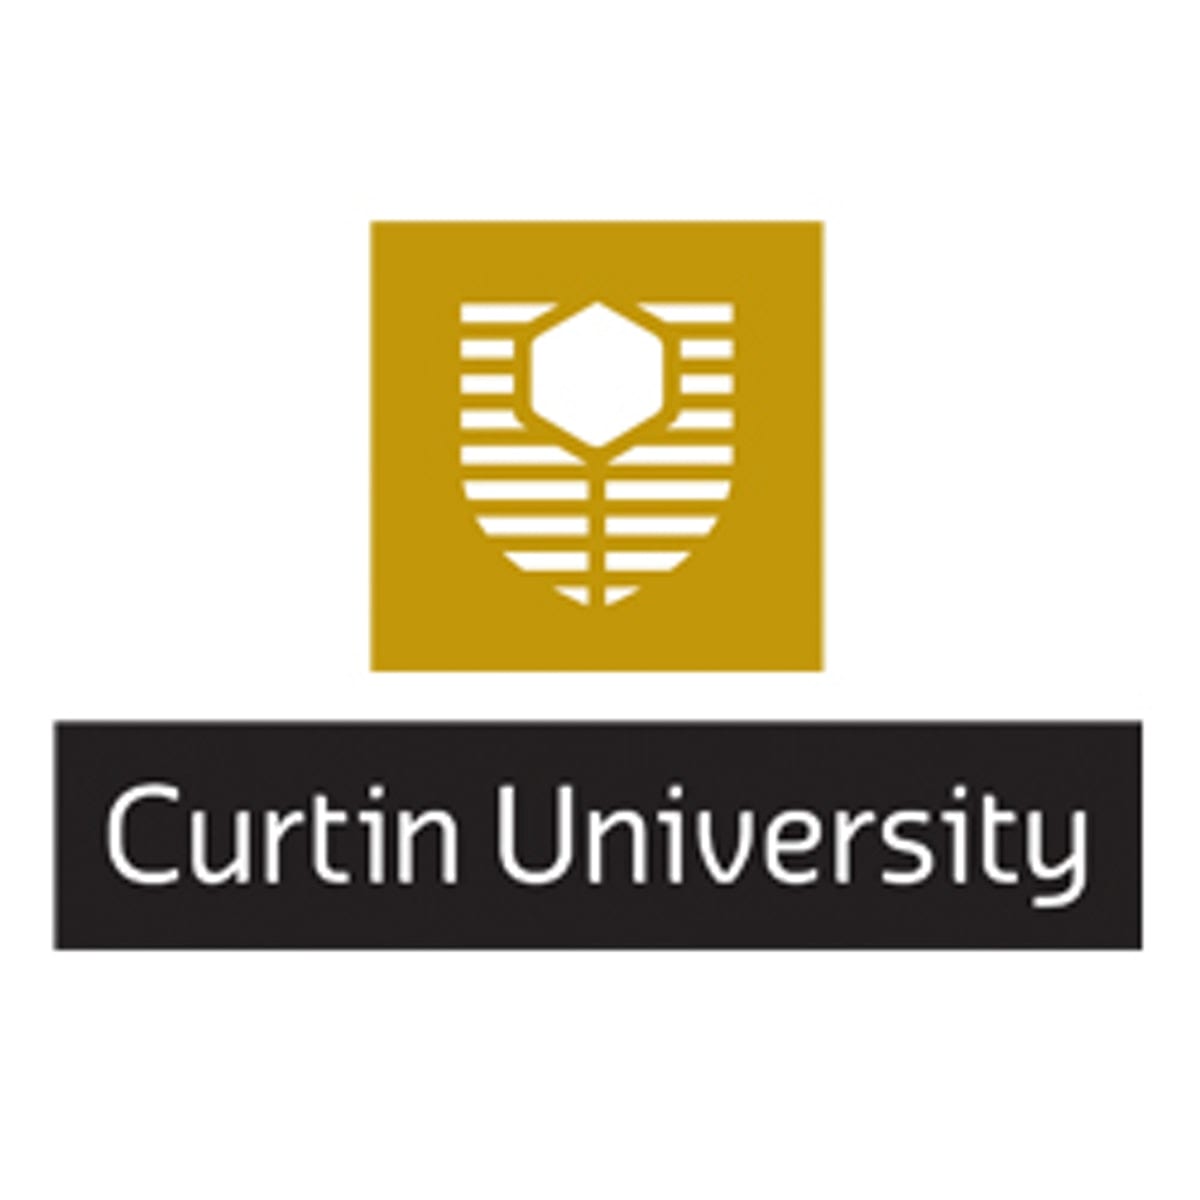 Higher degree by research - Curtin University